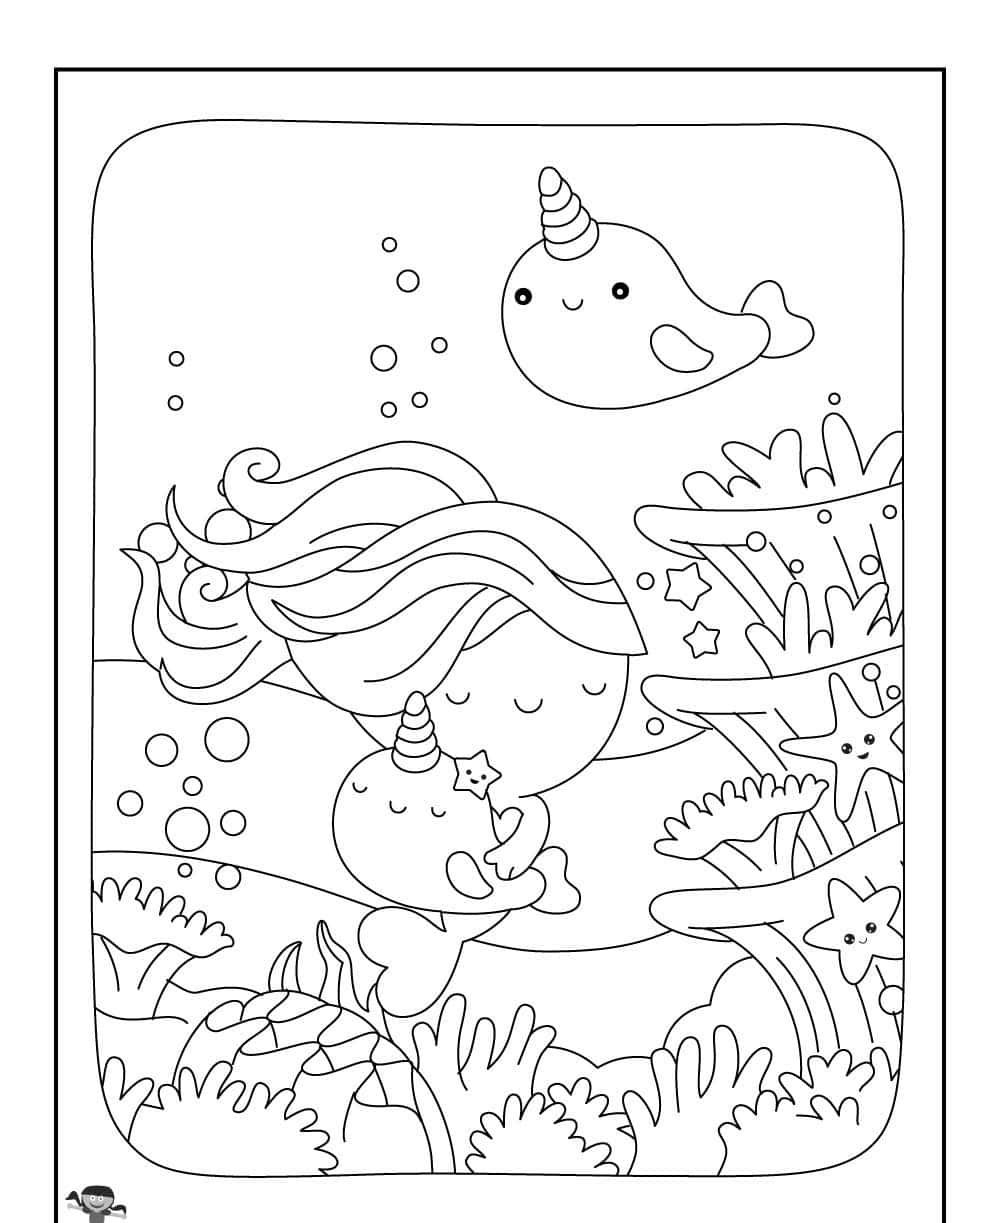 Colorful Mermaid inspired Coloring Page